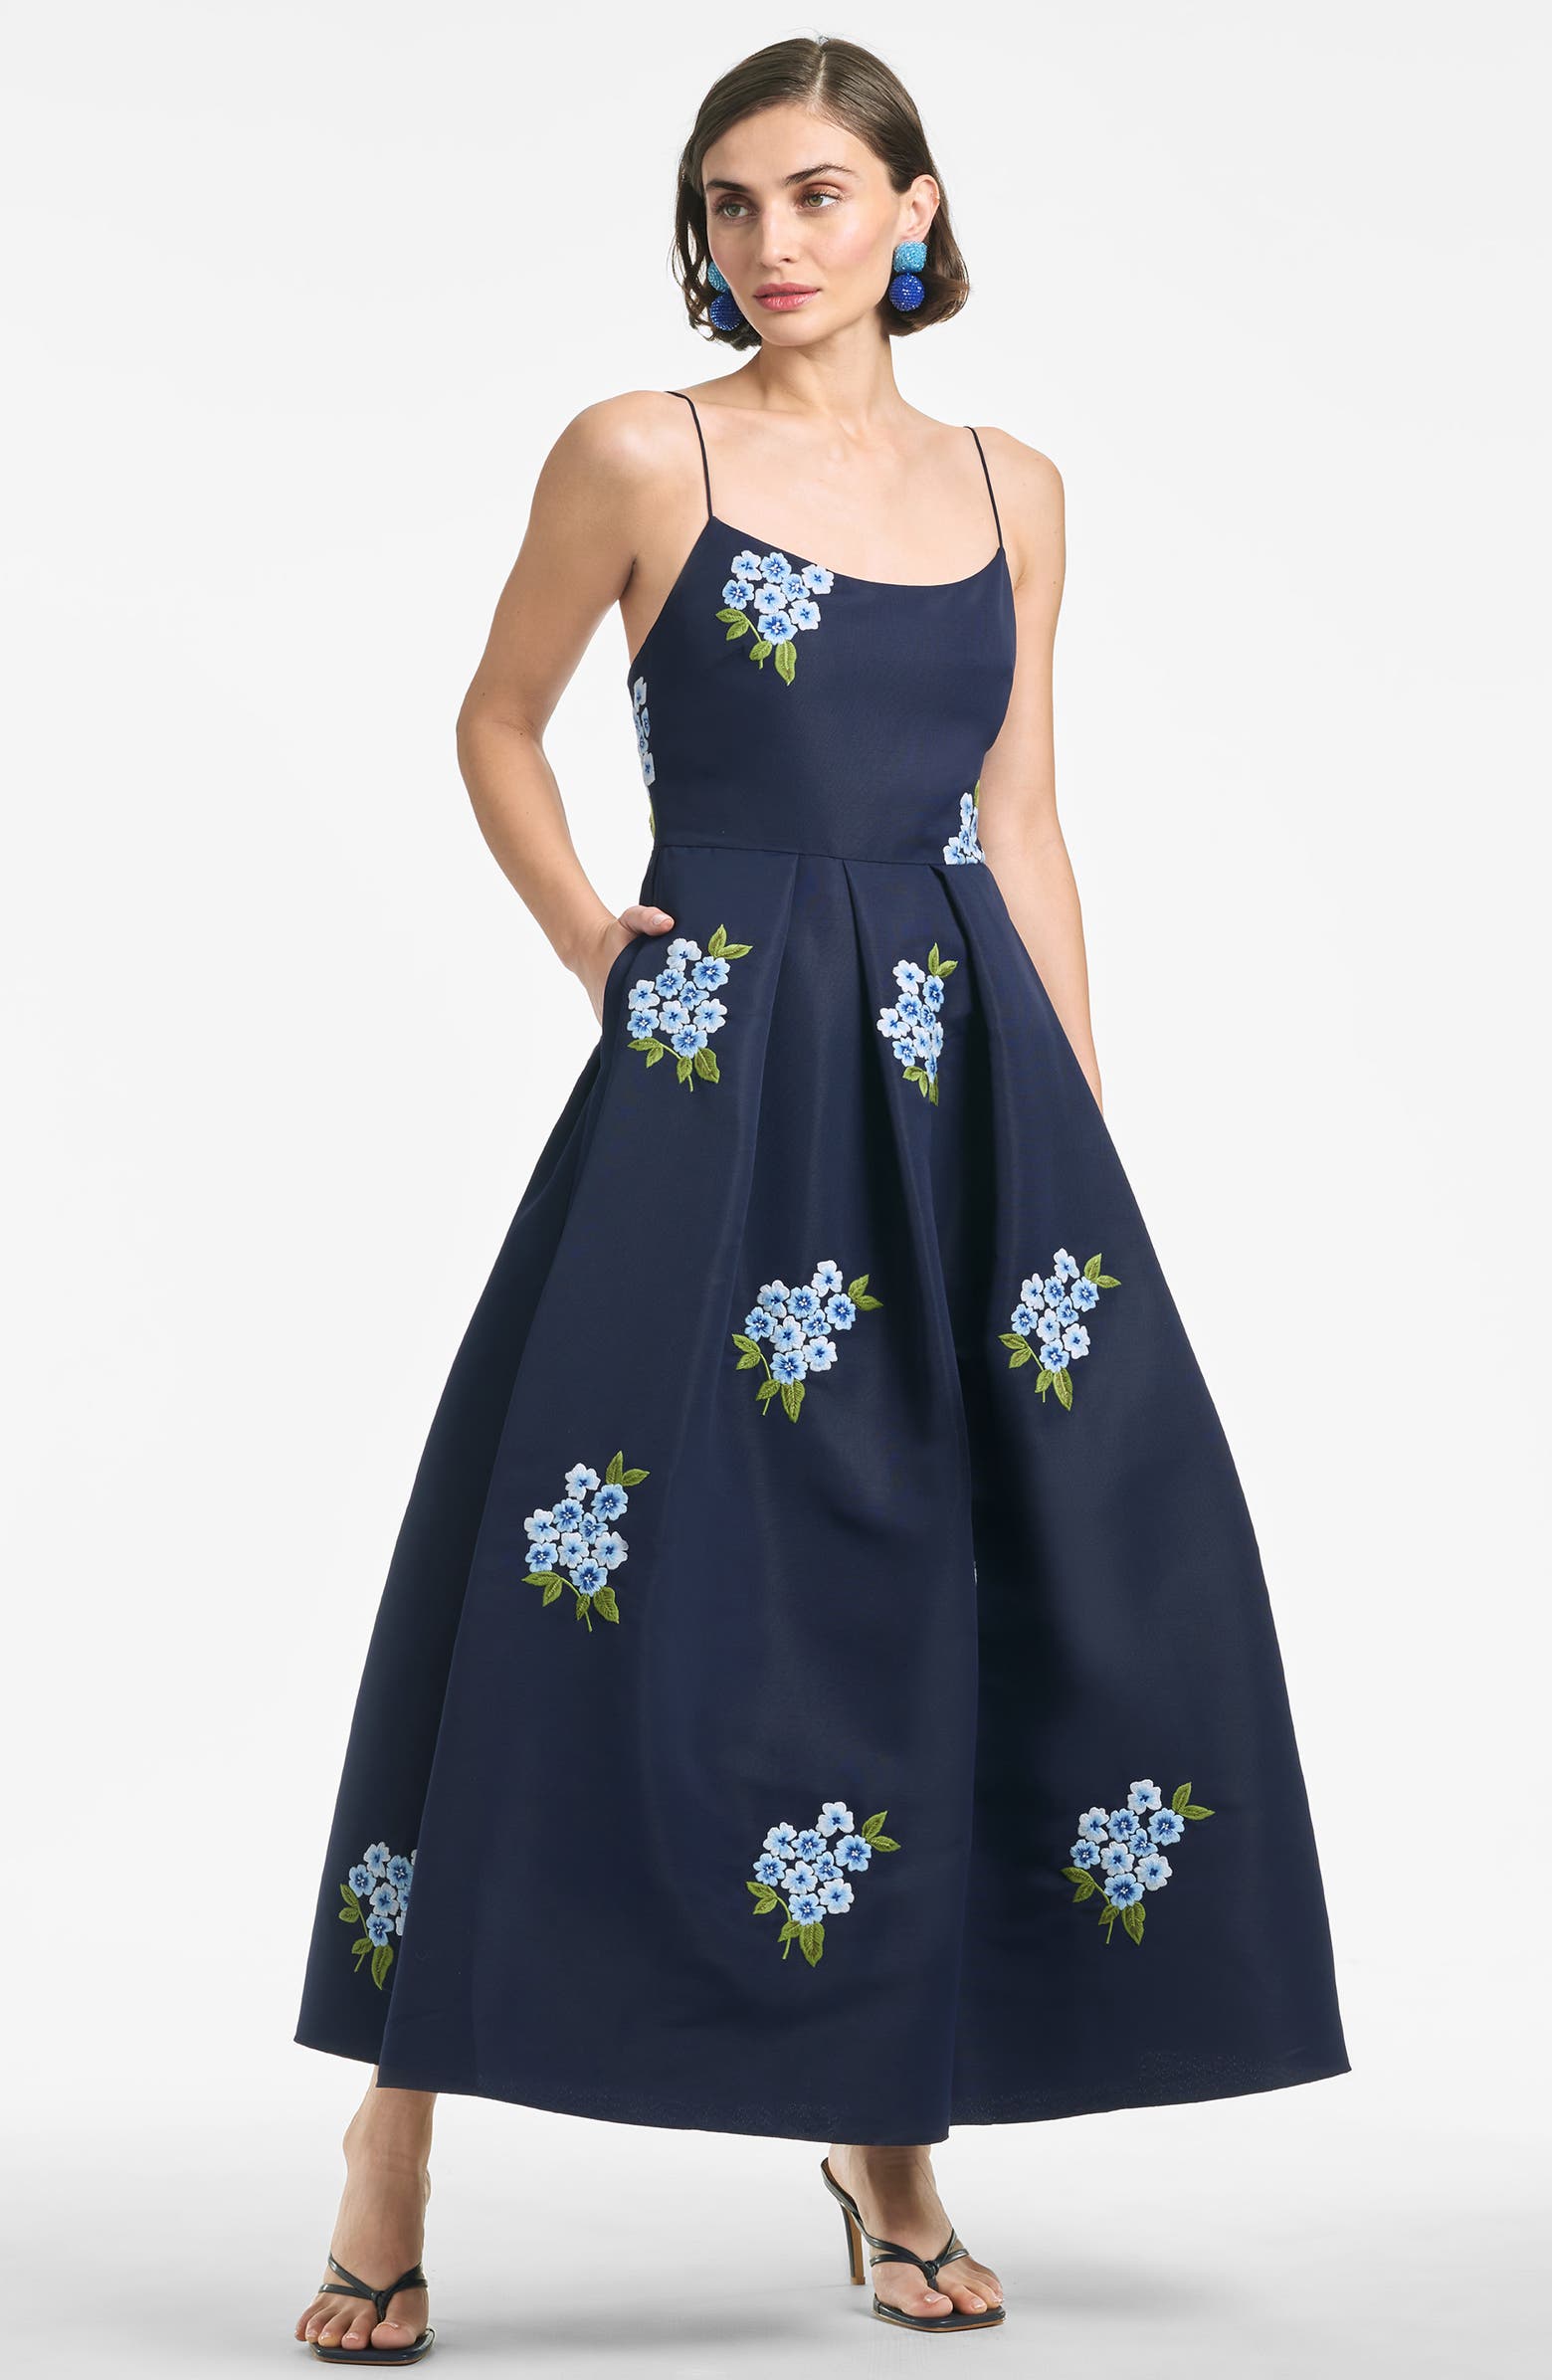 Sachin & Babi Audra Floral Embroidery Cocktail Midi Dress | Nordstrom